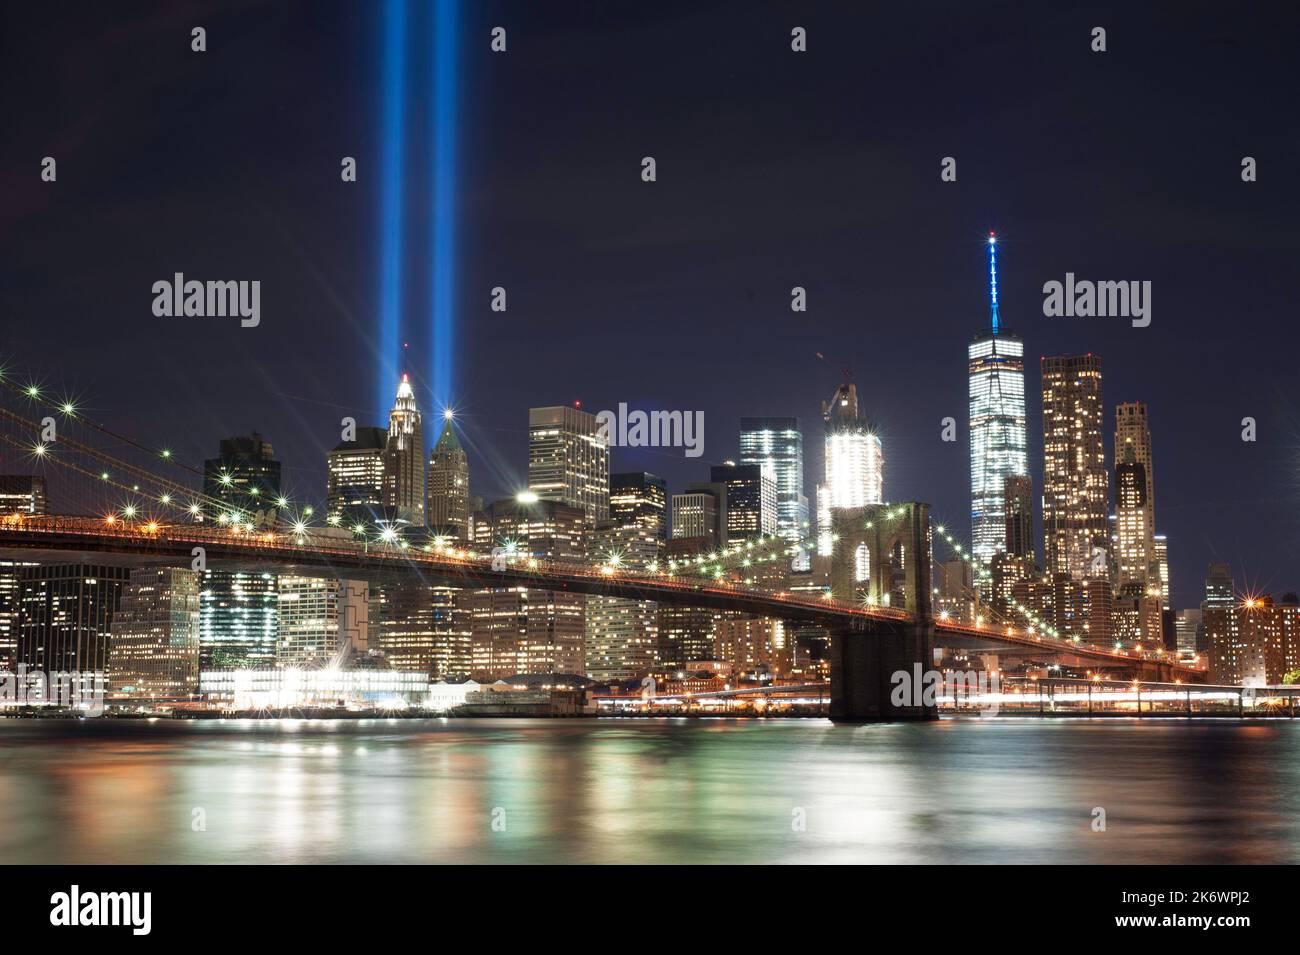 Tribute in Lights: tributing 9/11 victims with two blue rays of light from Ground Zero to the sky in New York City. Stock Photo